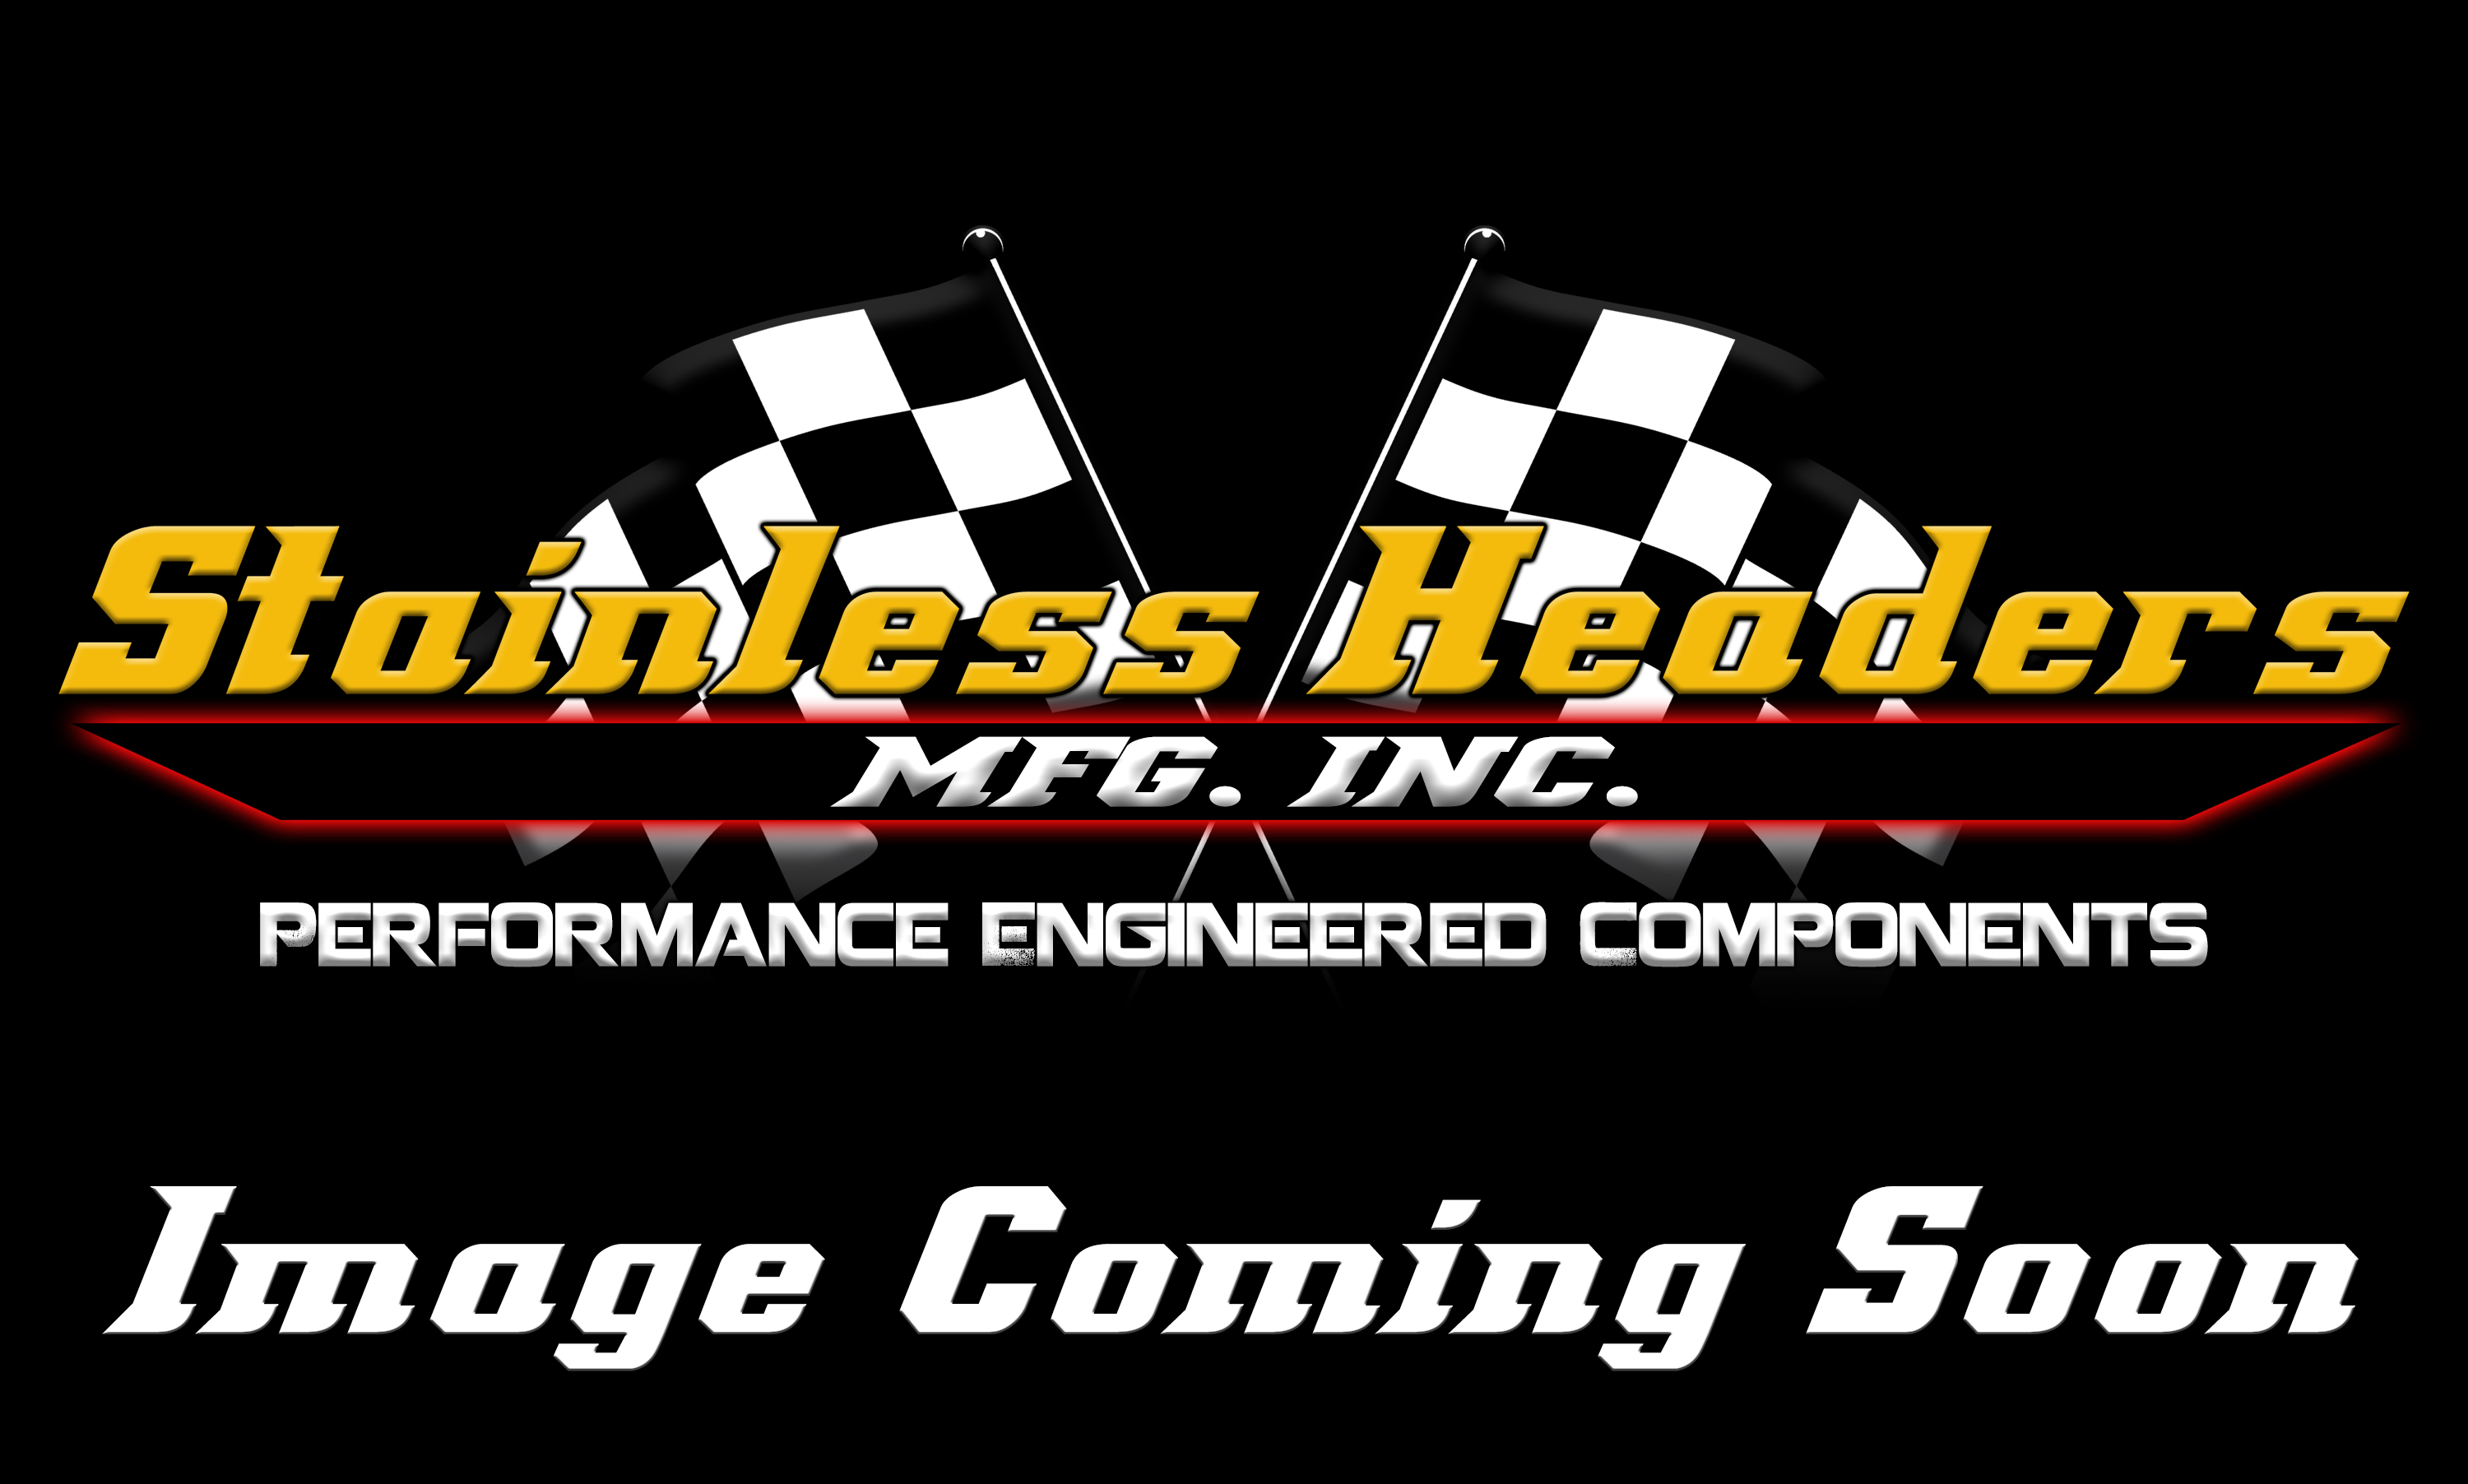 CompTurbo Technologies - CTR4818R-8090 Mid Frame Oil Lubricated 2.0 Turbocharger (1350 HP) - Image 1